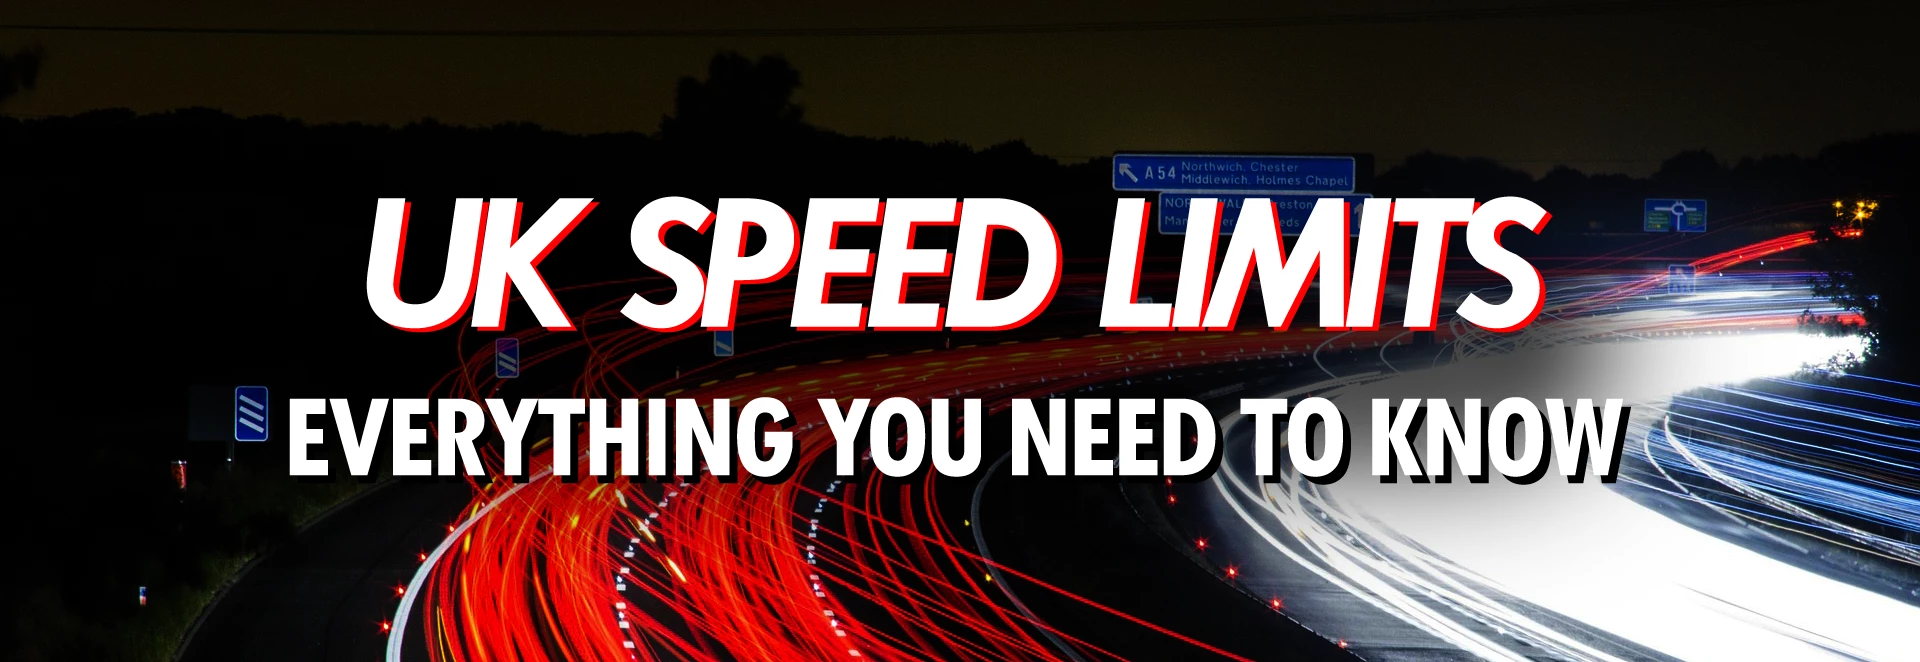 UK speed limits, everything there is to know 